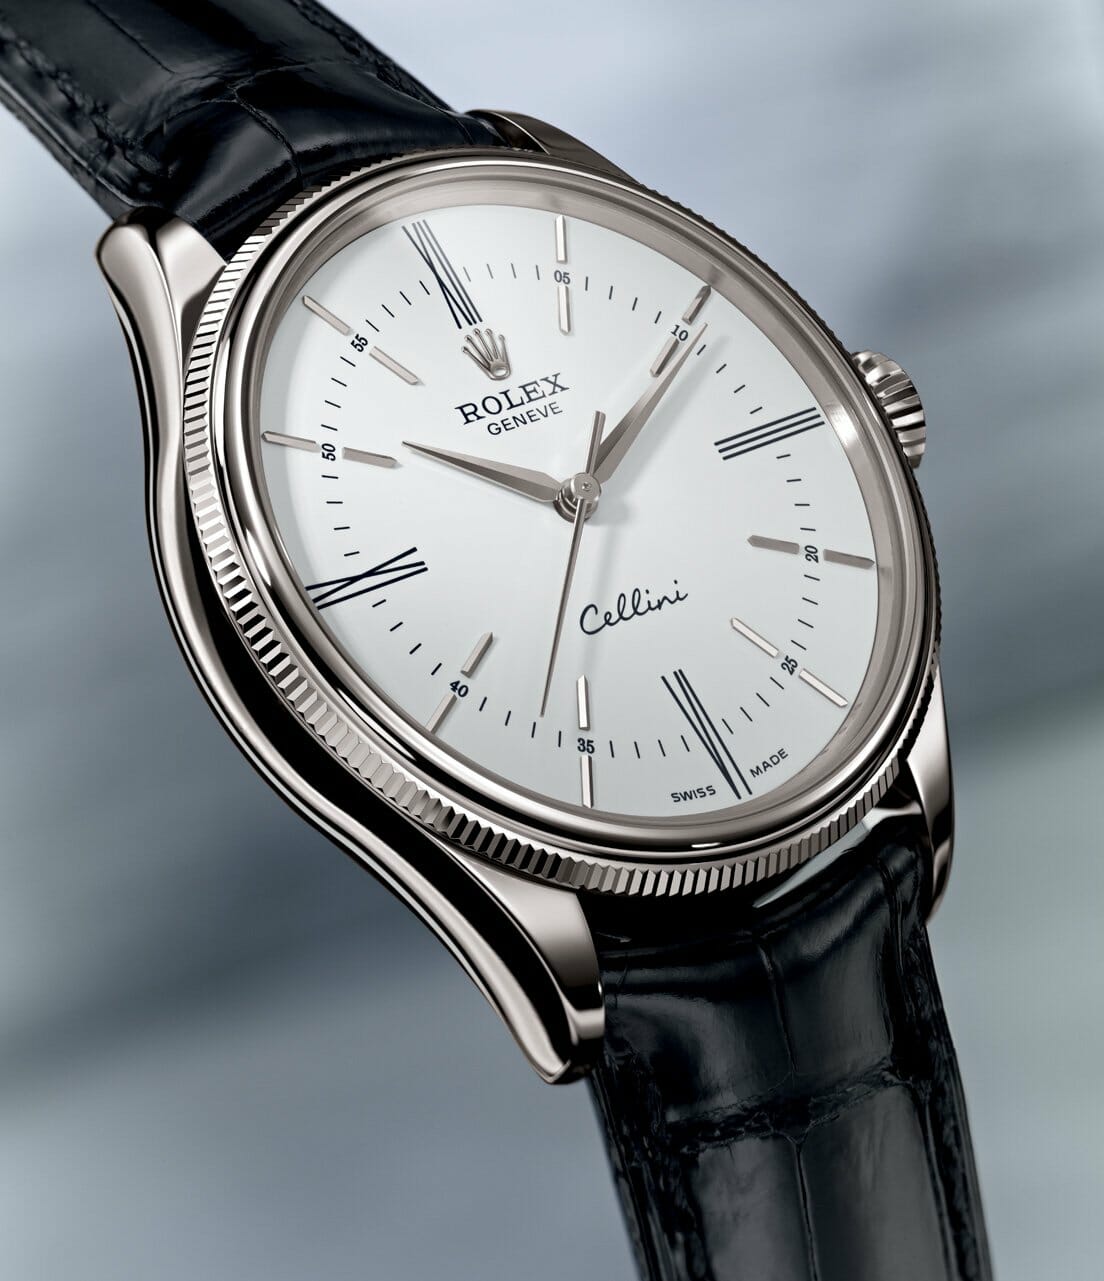 The Rolex Cellini - Minimalistic Power And Style